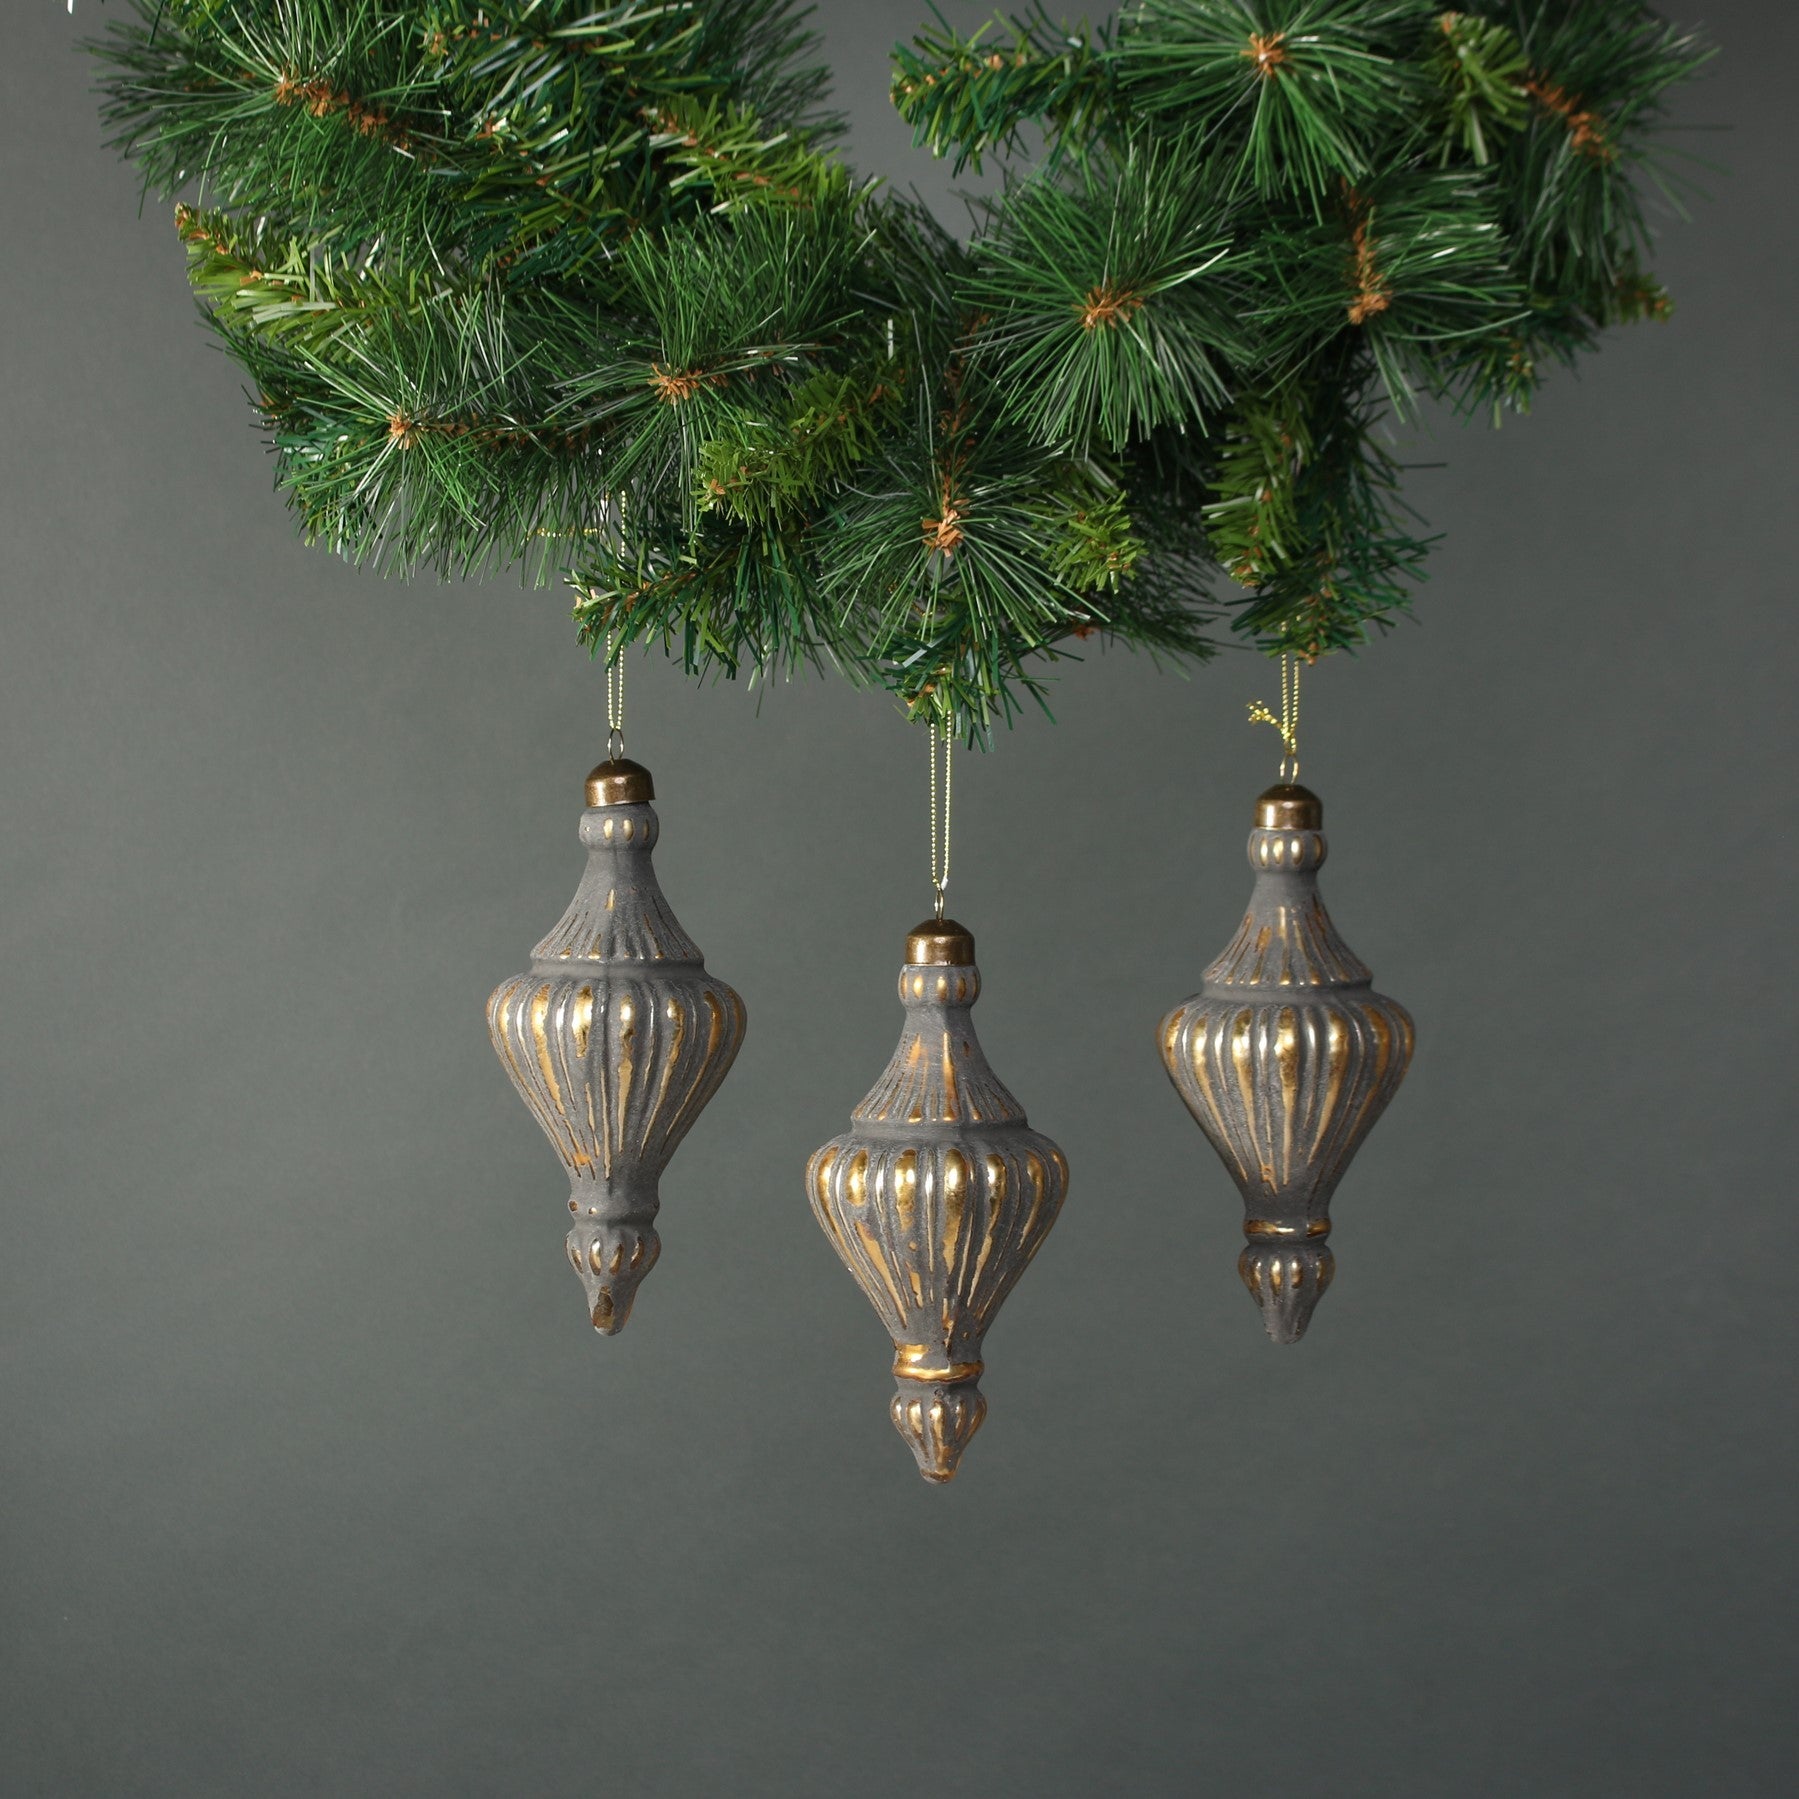 View Luna Glass Ornate Lamp Bauble Pewter Gold Set of 4 information